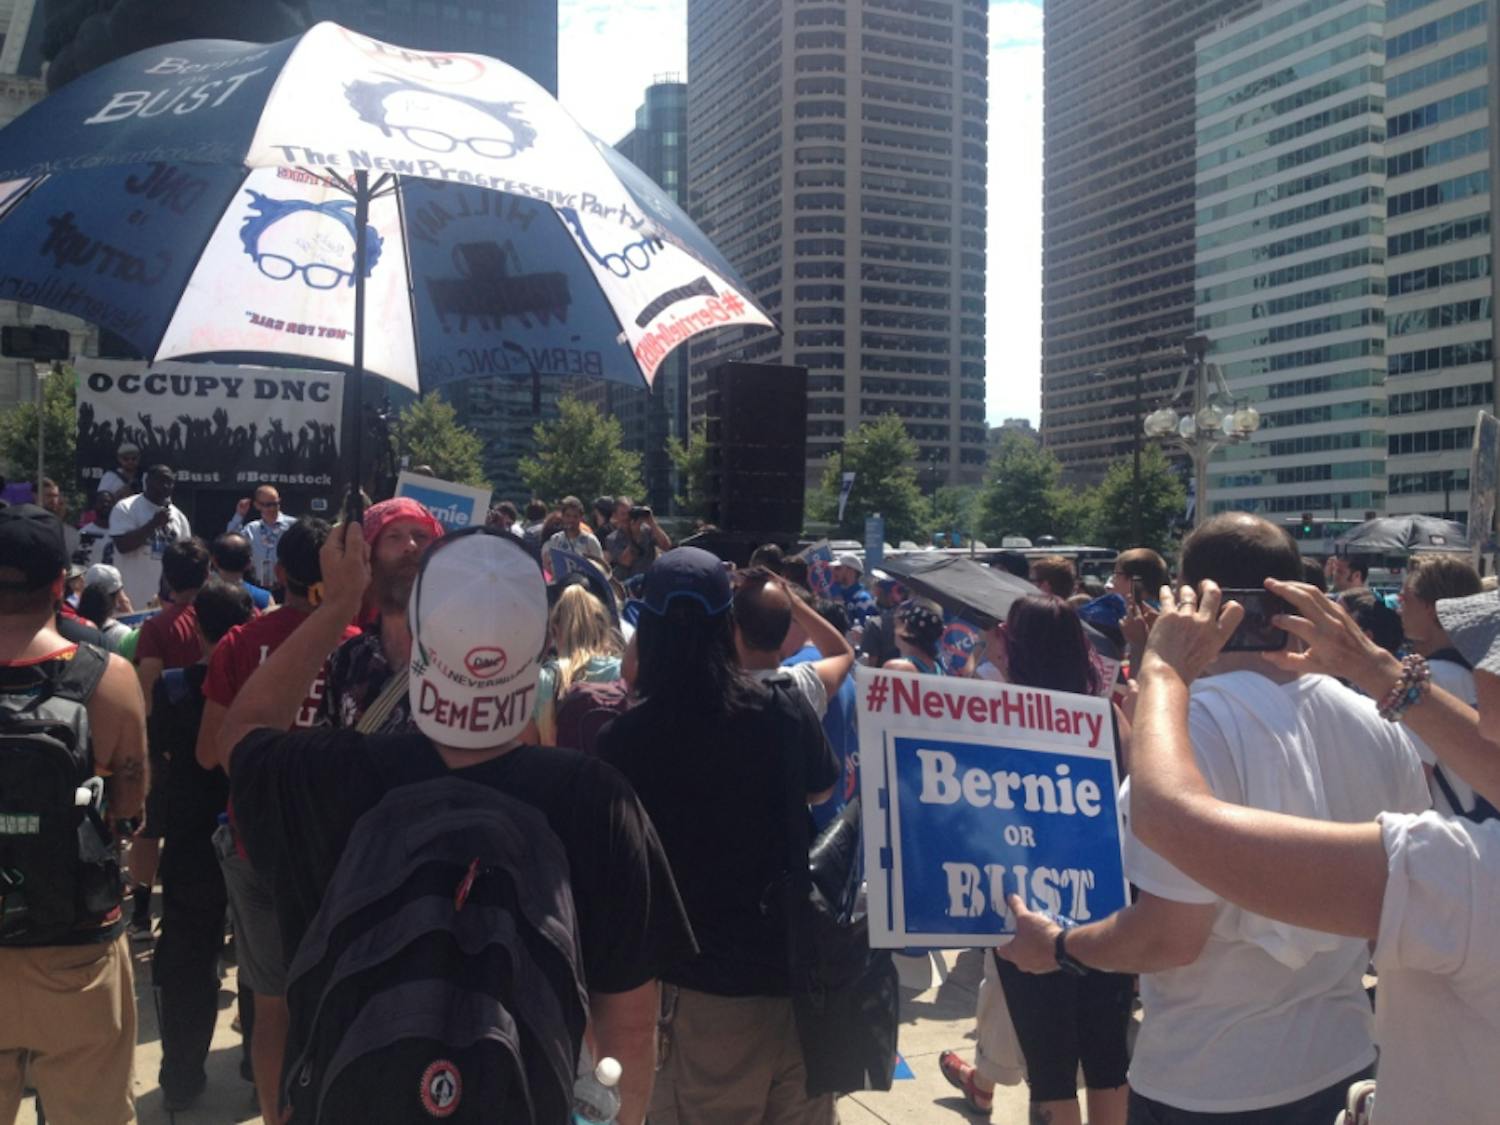 Delegates for Bernie Sanders and supporters of the Bernie or bust movement rally outside of City Hall in Philadelphia during the Democratic National Convention on July 27, 2016.